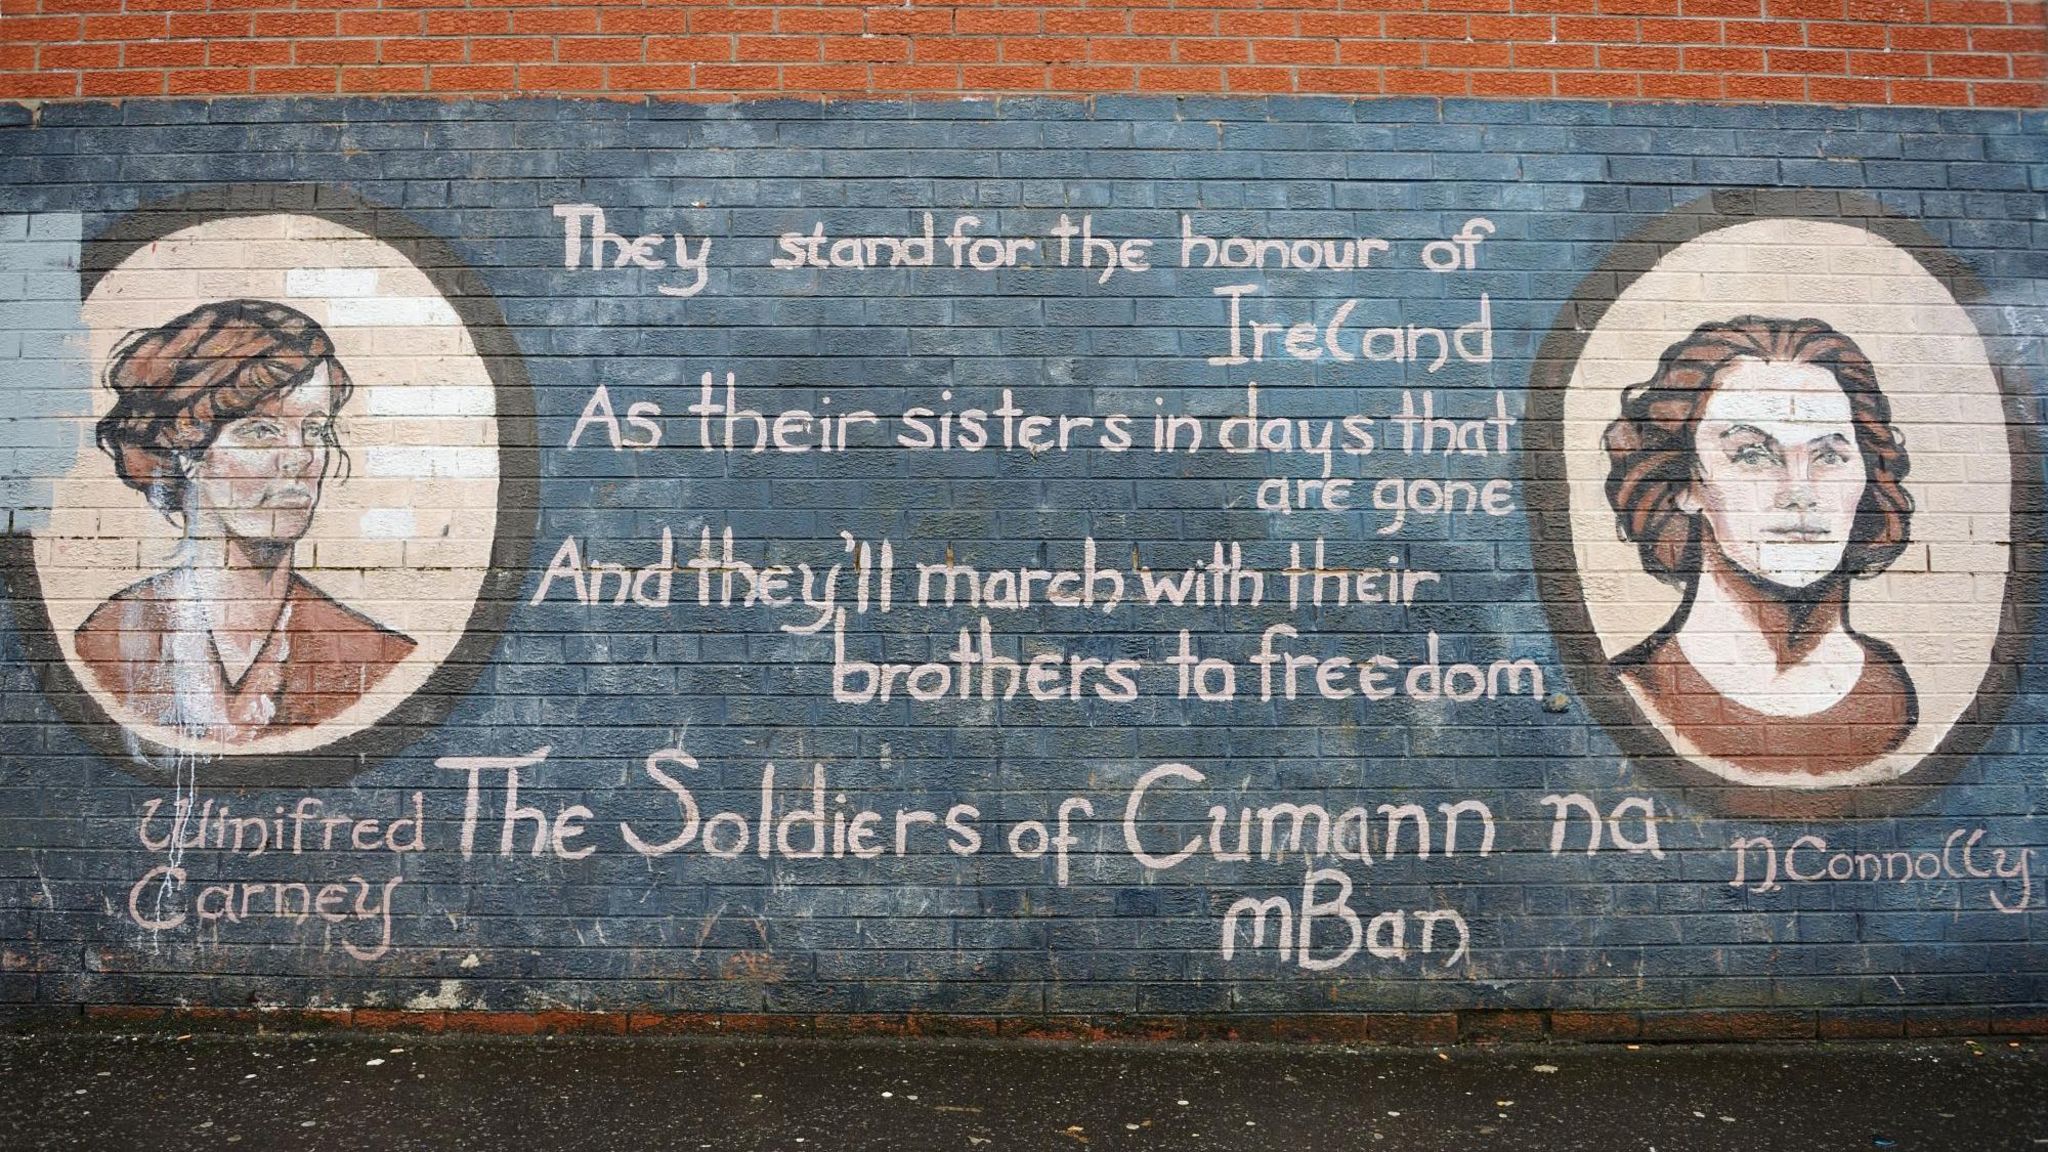 mural painting depicting Winifred Carney and N. Connolly on the Falls Road, Belfast